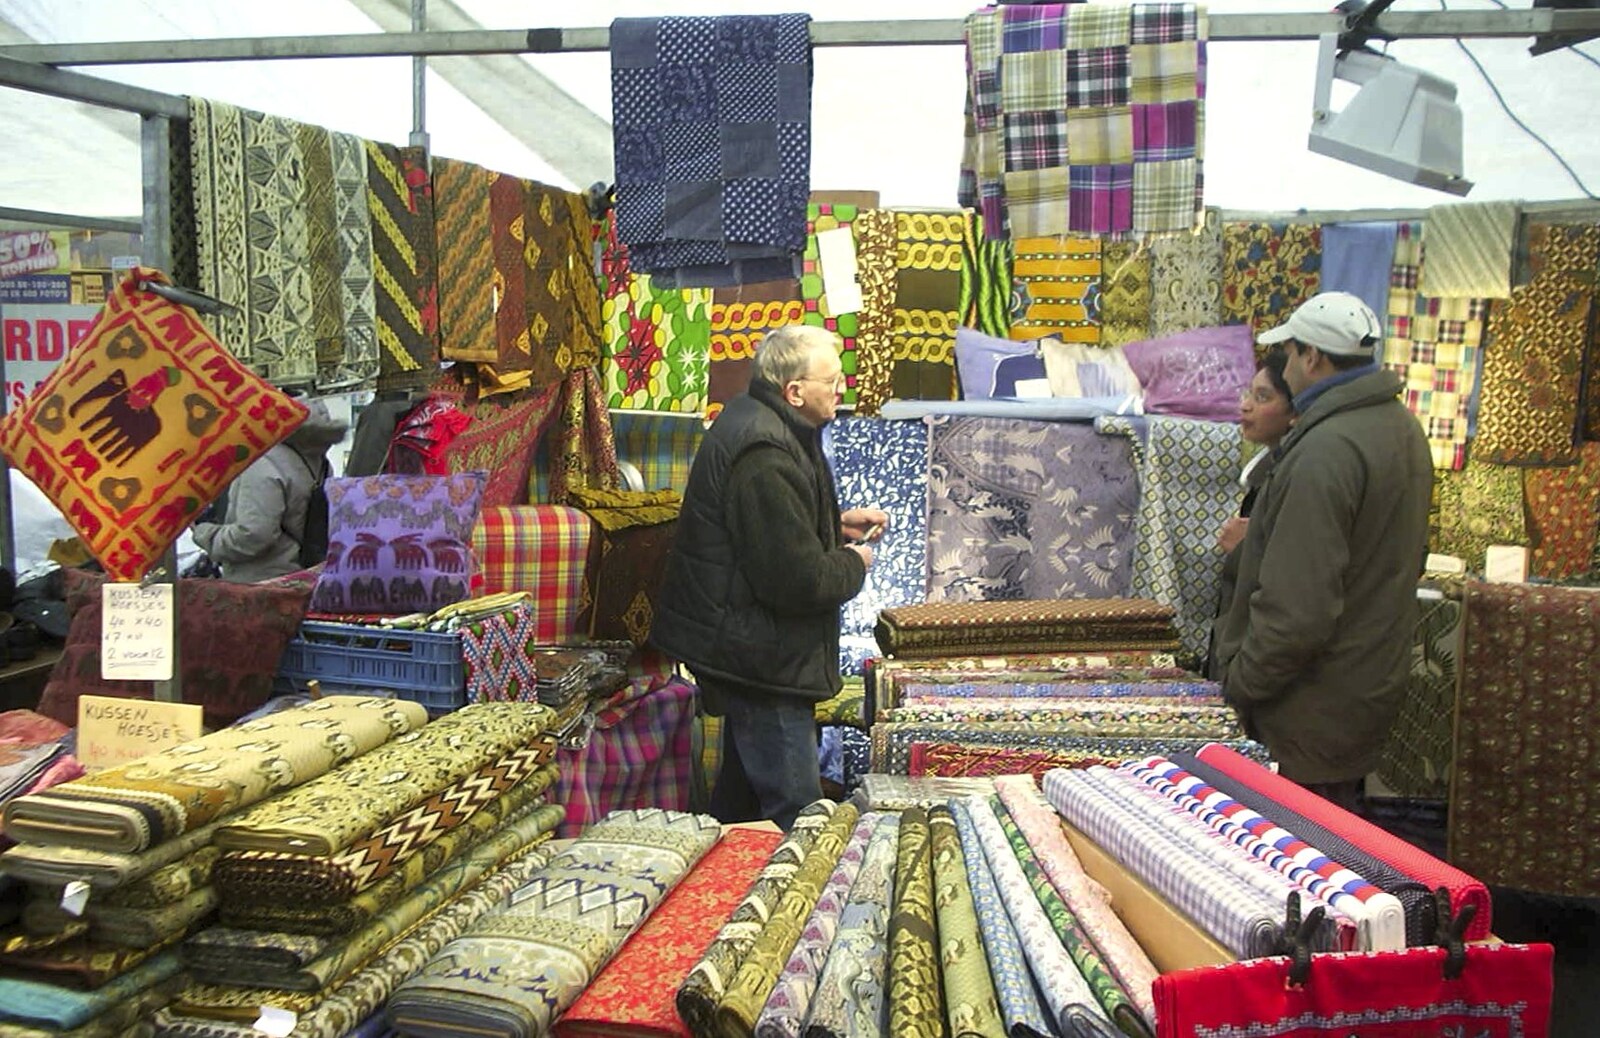 A rug stall from Anne Frank, Markets and Mikey-P's Stag Do, Amsterdam, Netherlands - 6th March 2004